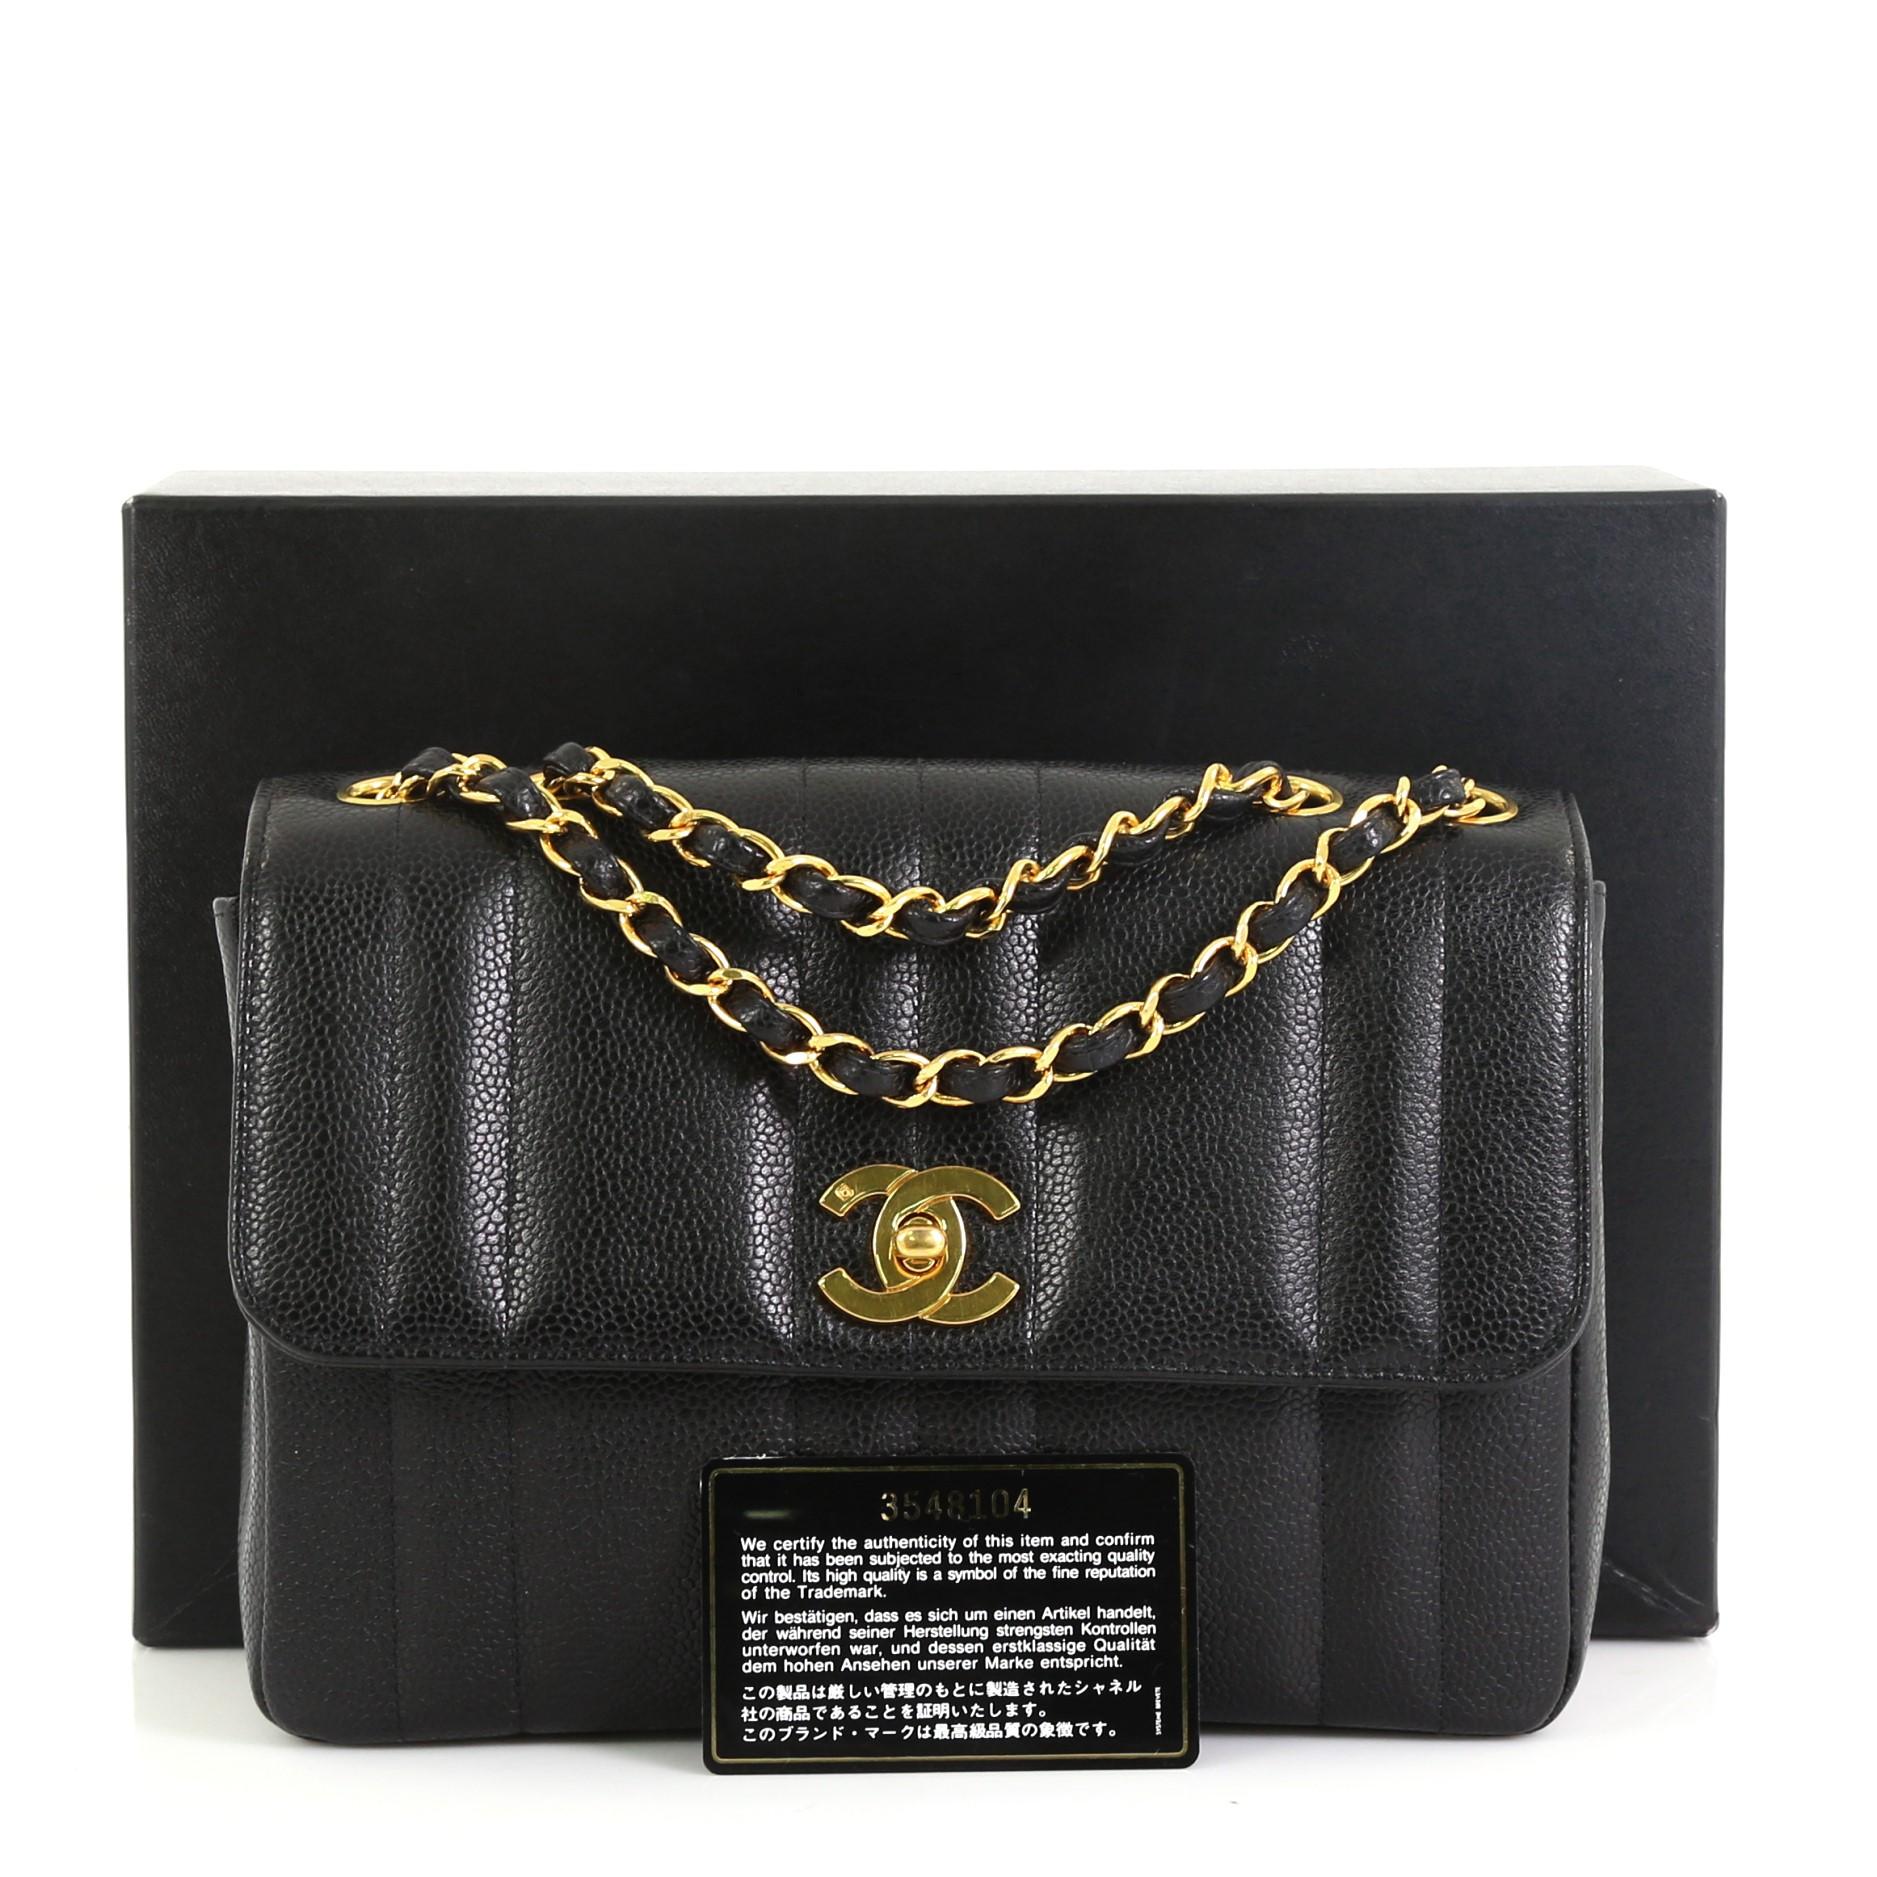 This Chanel Vintage CC Chain Flap Bag Vertical Quilt Caviar Small, crafted in black caviar leather, features woven-in gold leather chain link shoulder strap, signature gold-tone CC turn-lock closure and gold-tone hardware. Its turn-lock closure